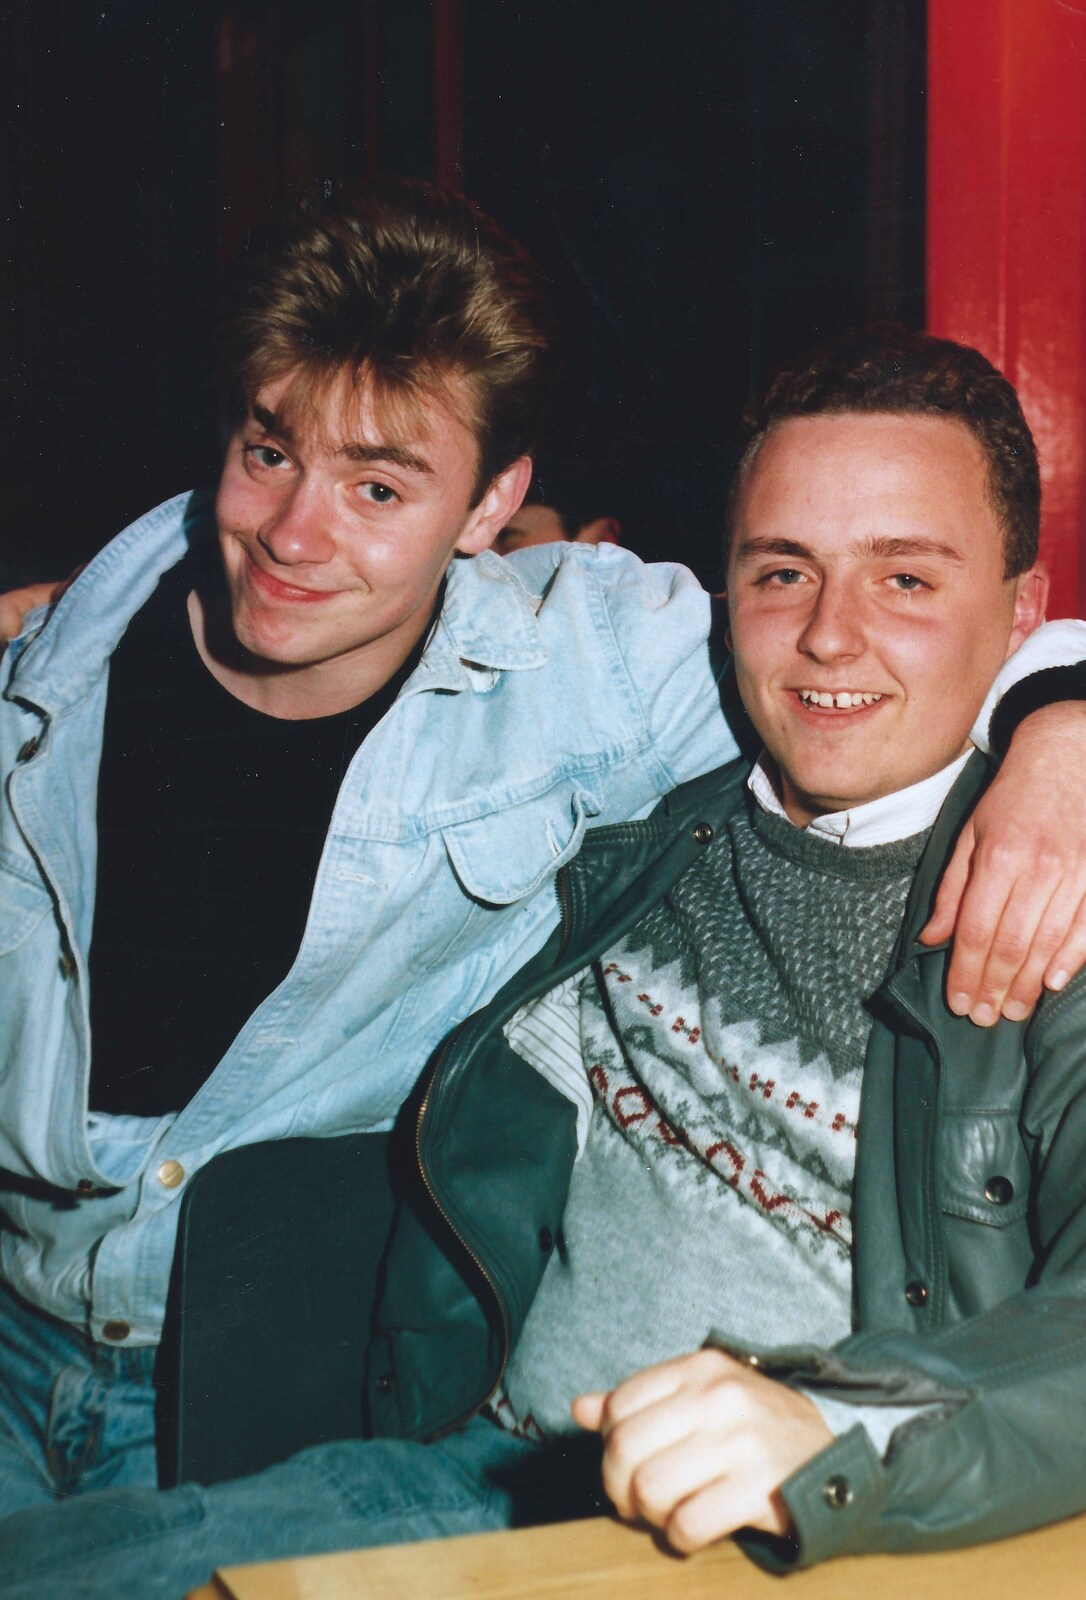 Bray-Feature and his mate from Uni: The Last Day of Term, Plymouth Polytechnic, Devon - 2nd June 1987